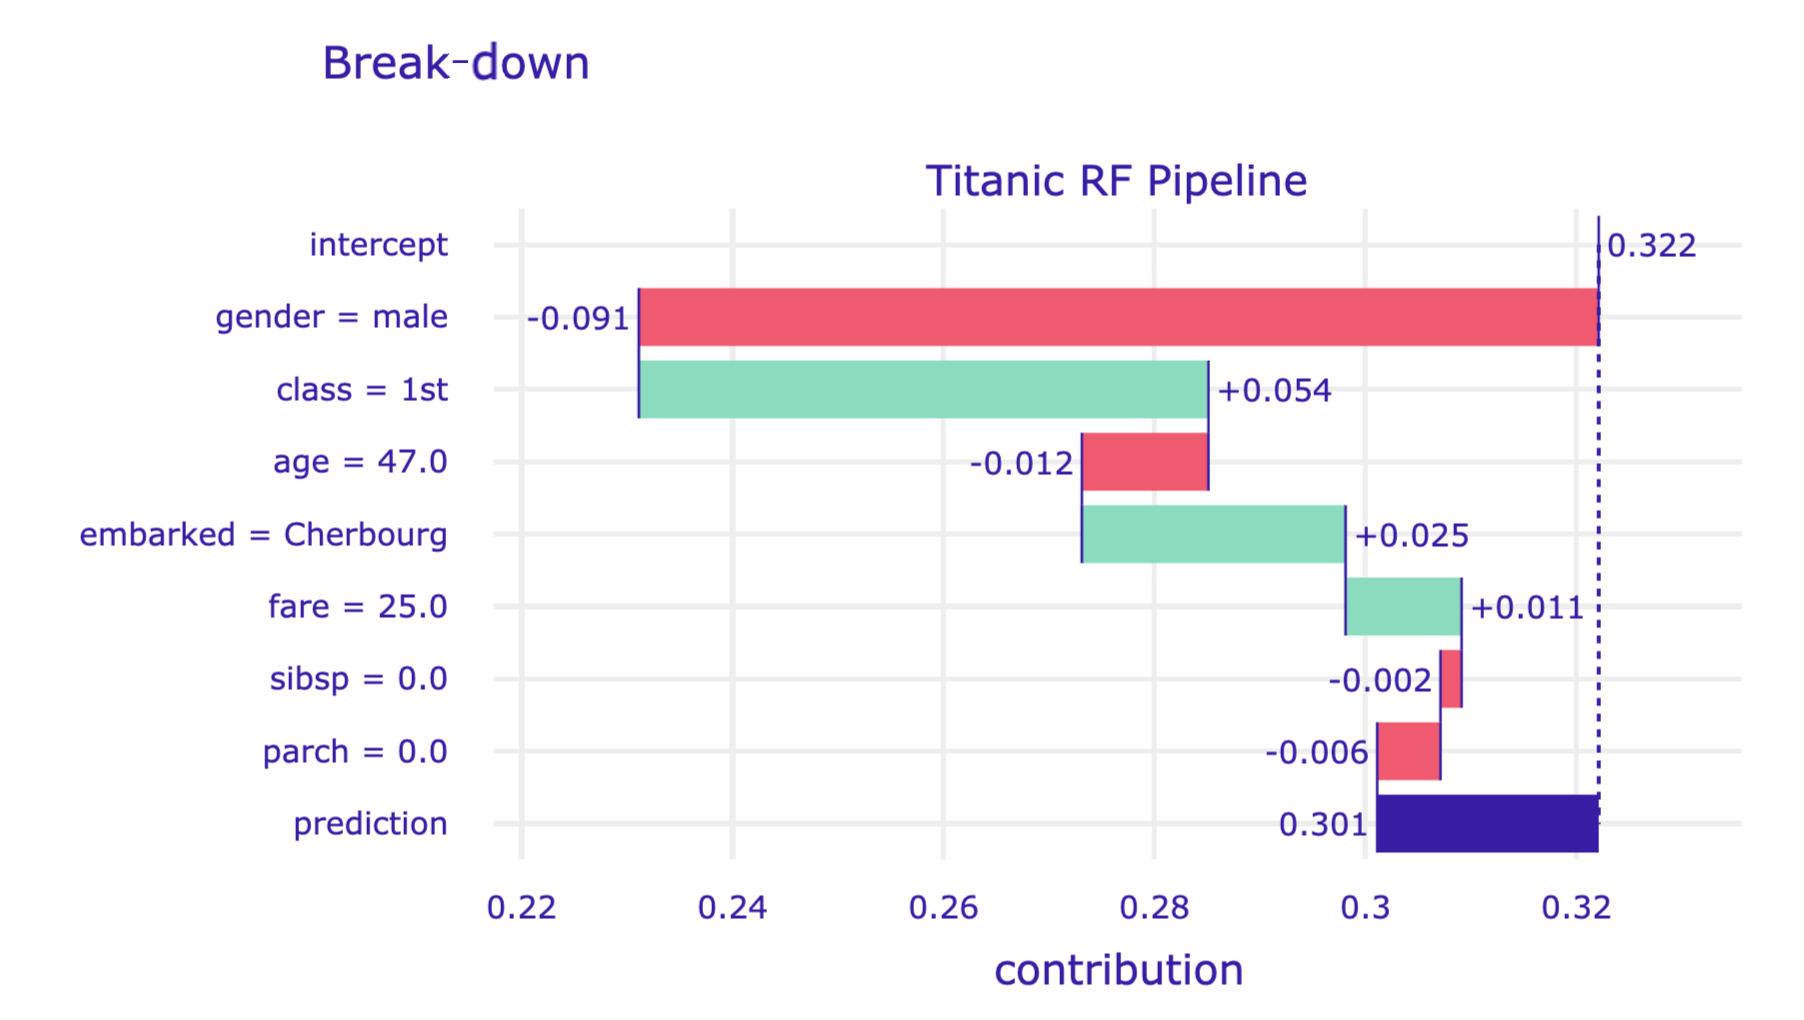 Break-down plot for a limited number of explanatory variables in a specified order for the random forest model and Henry for the Titanic data, obtained by the plot() method in Python.